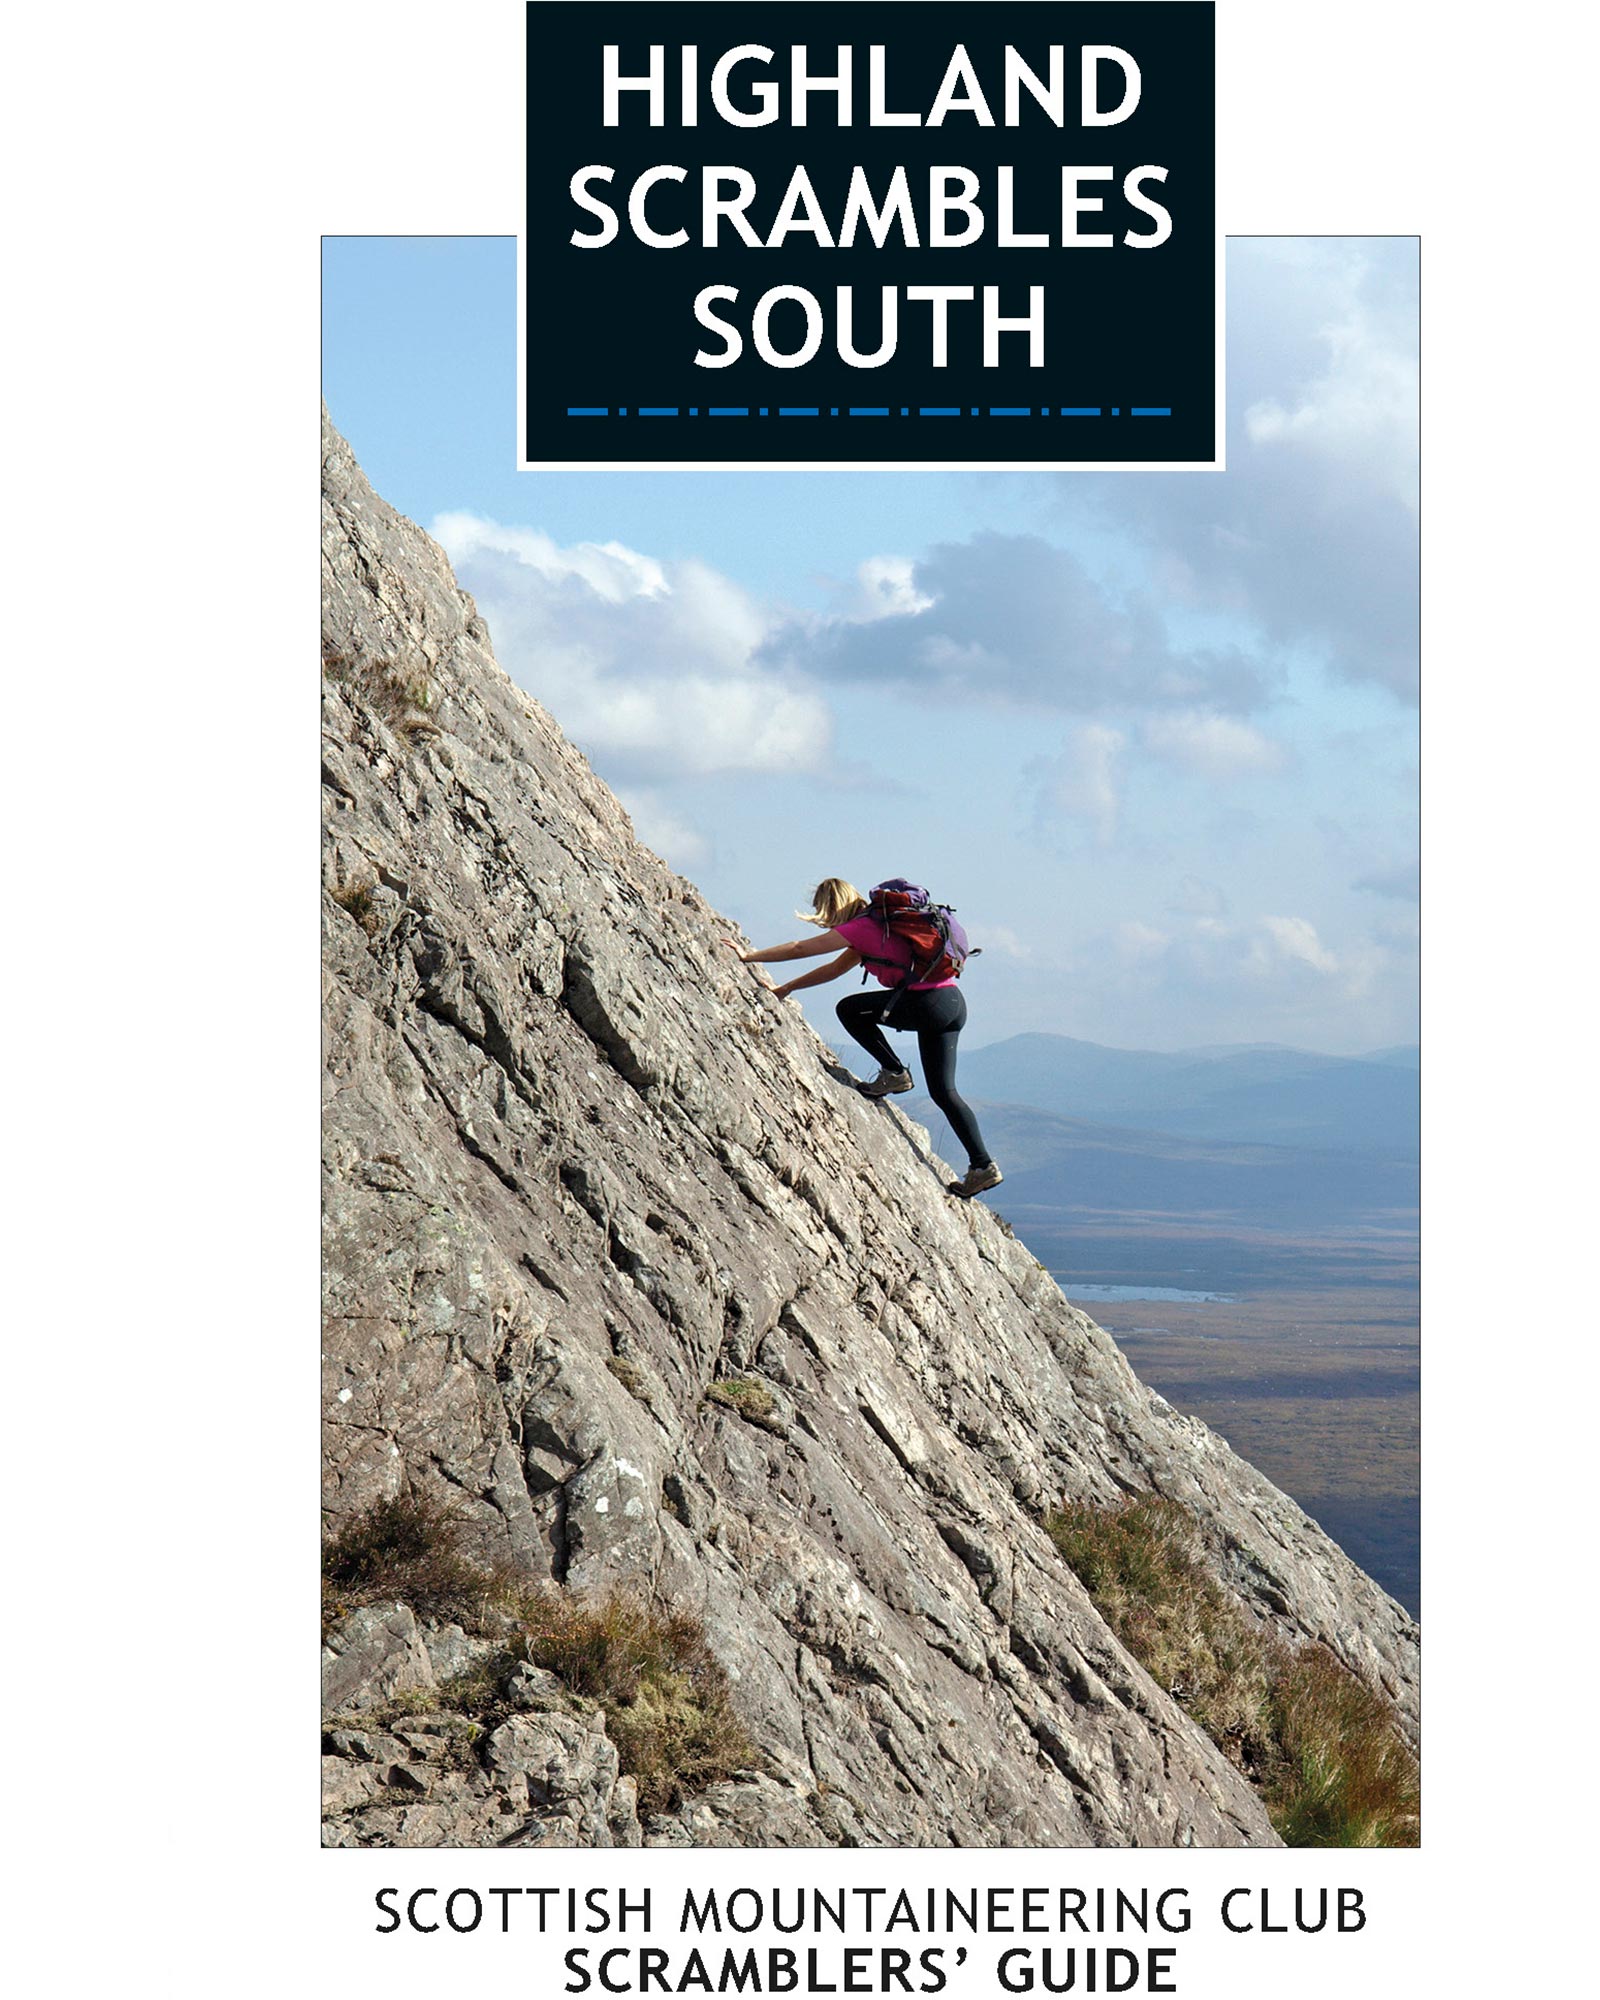 Scottish Mountaineering Club Highland Scrambles South Guide Book